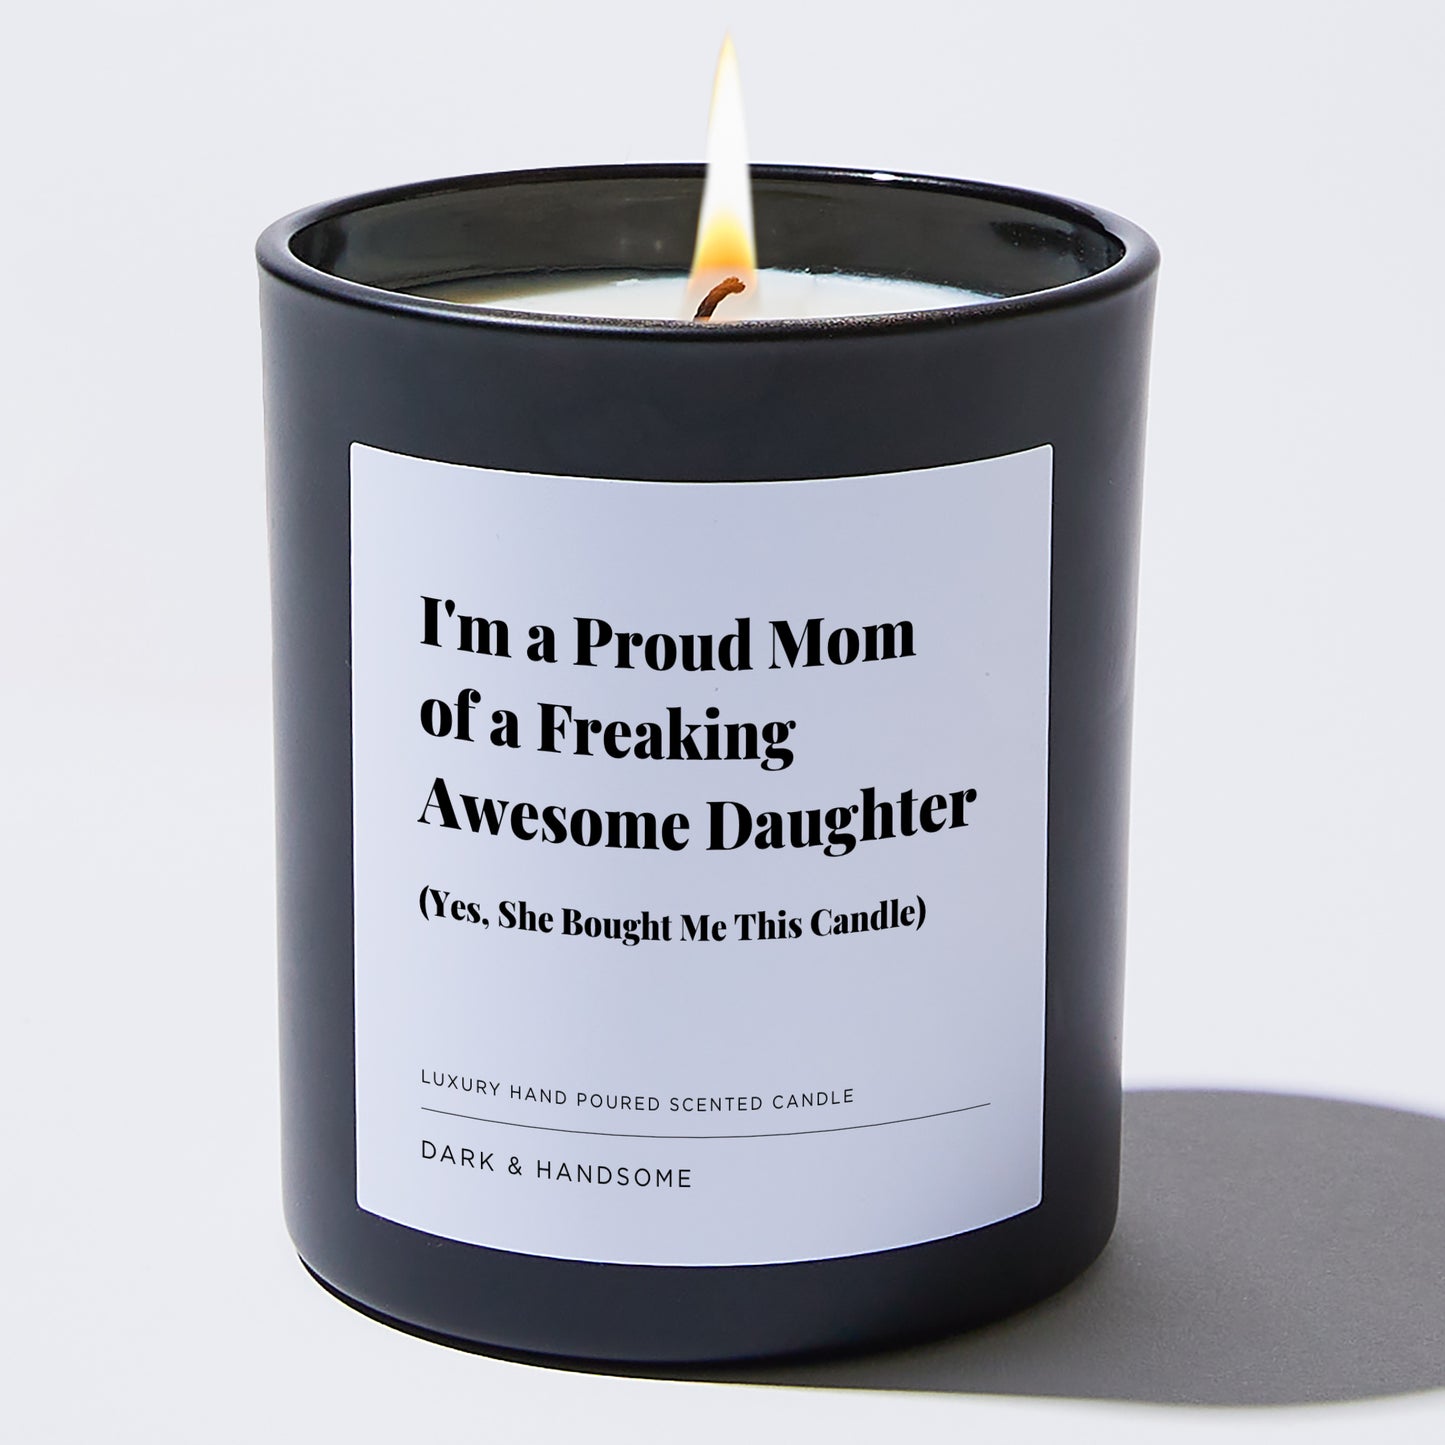 Gift for Mom - I'm a Proud Mom of a Freaking Awesome Daughter (yes, she bought me this candle) - Candle